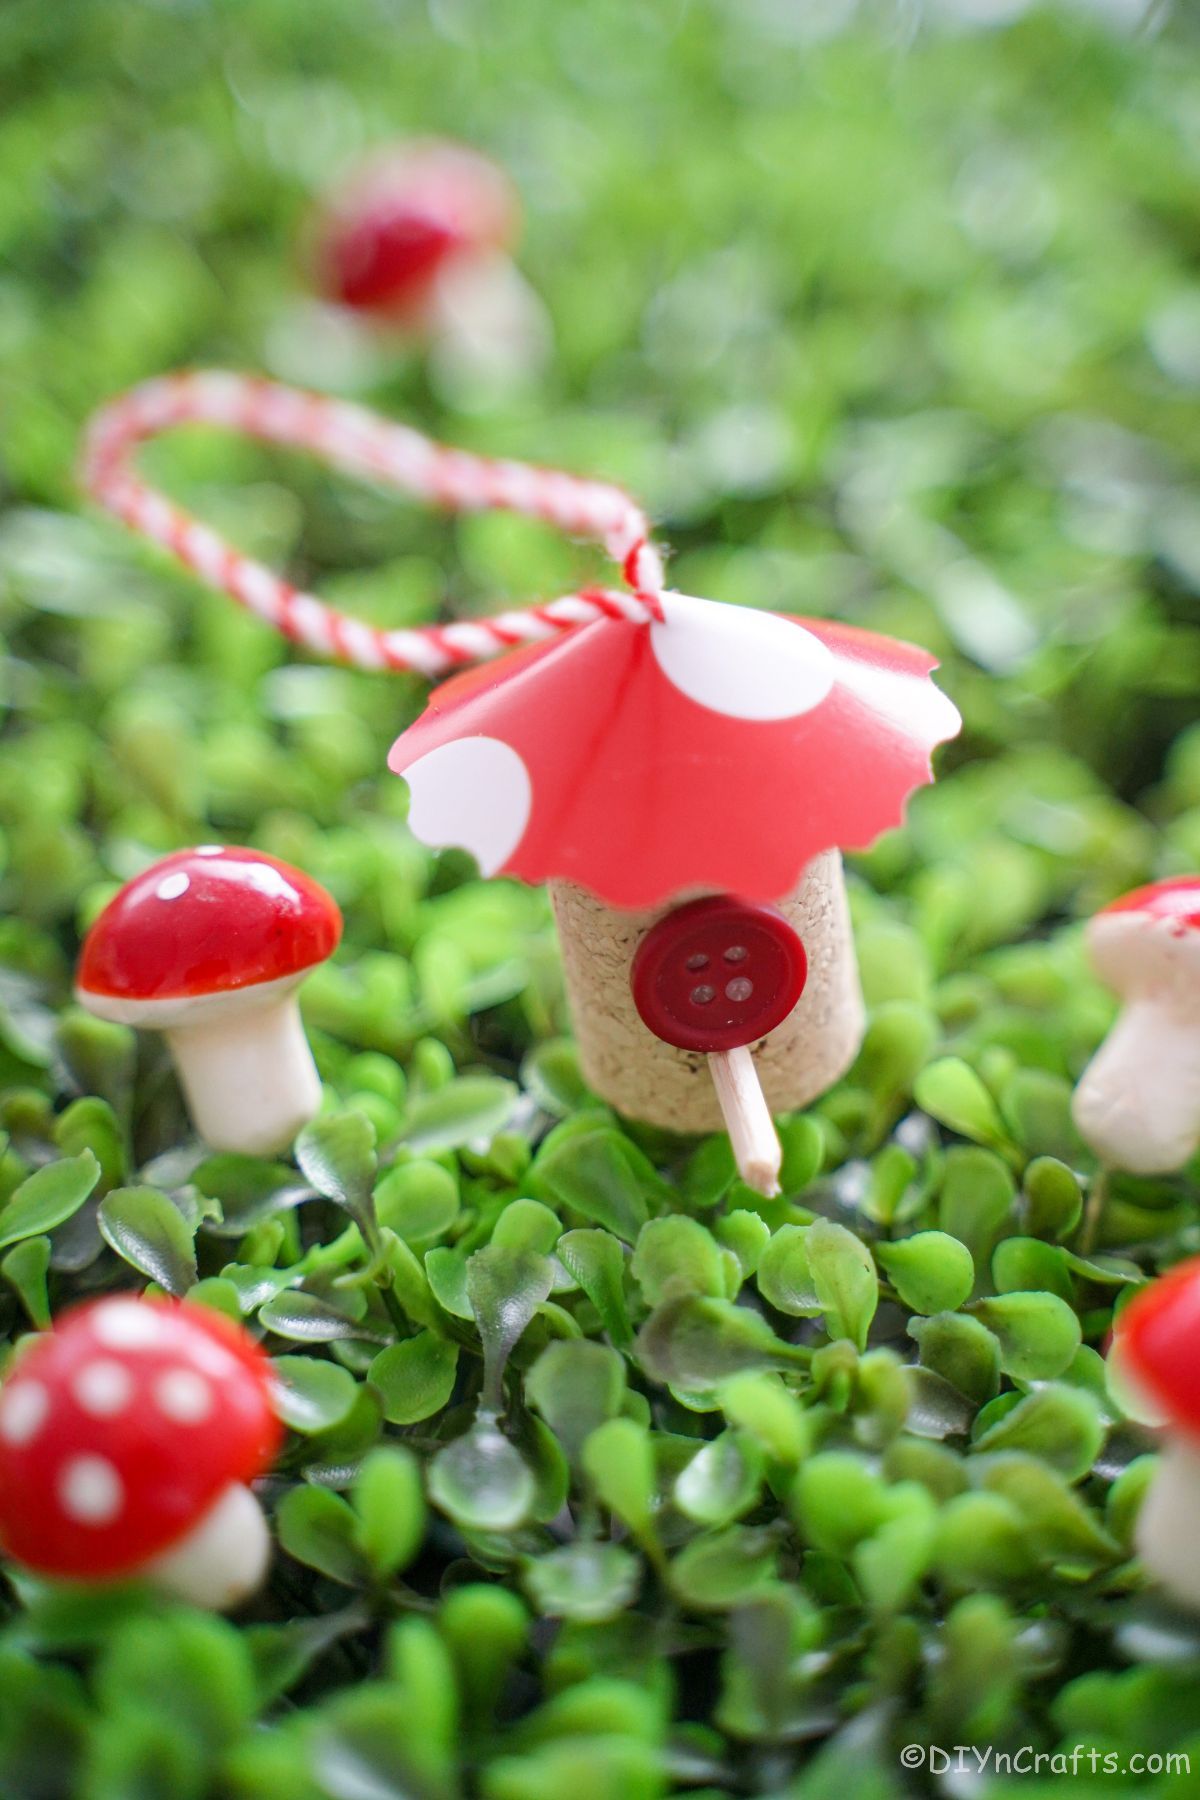 ceramic mini mushrooms and wine cork house with red roof on clover